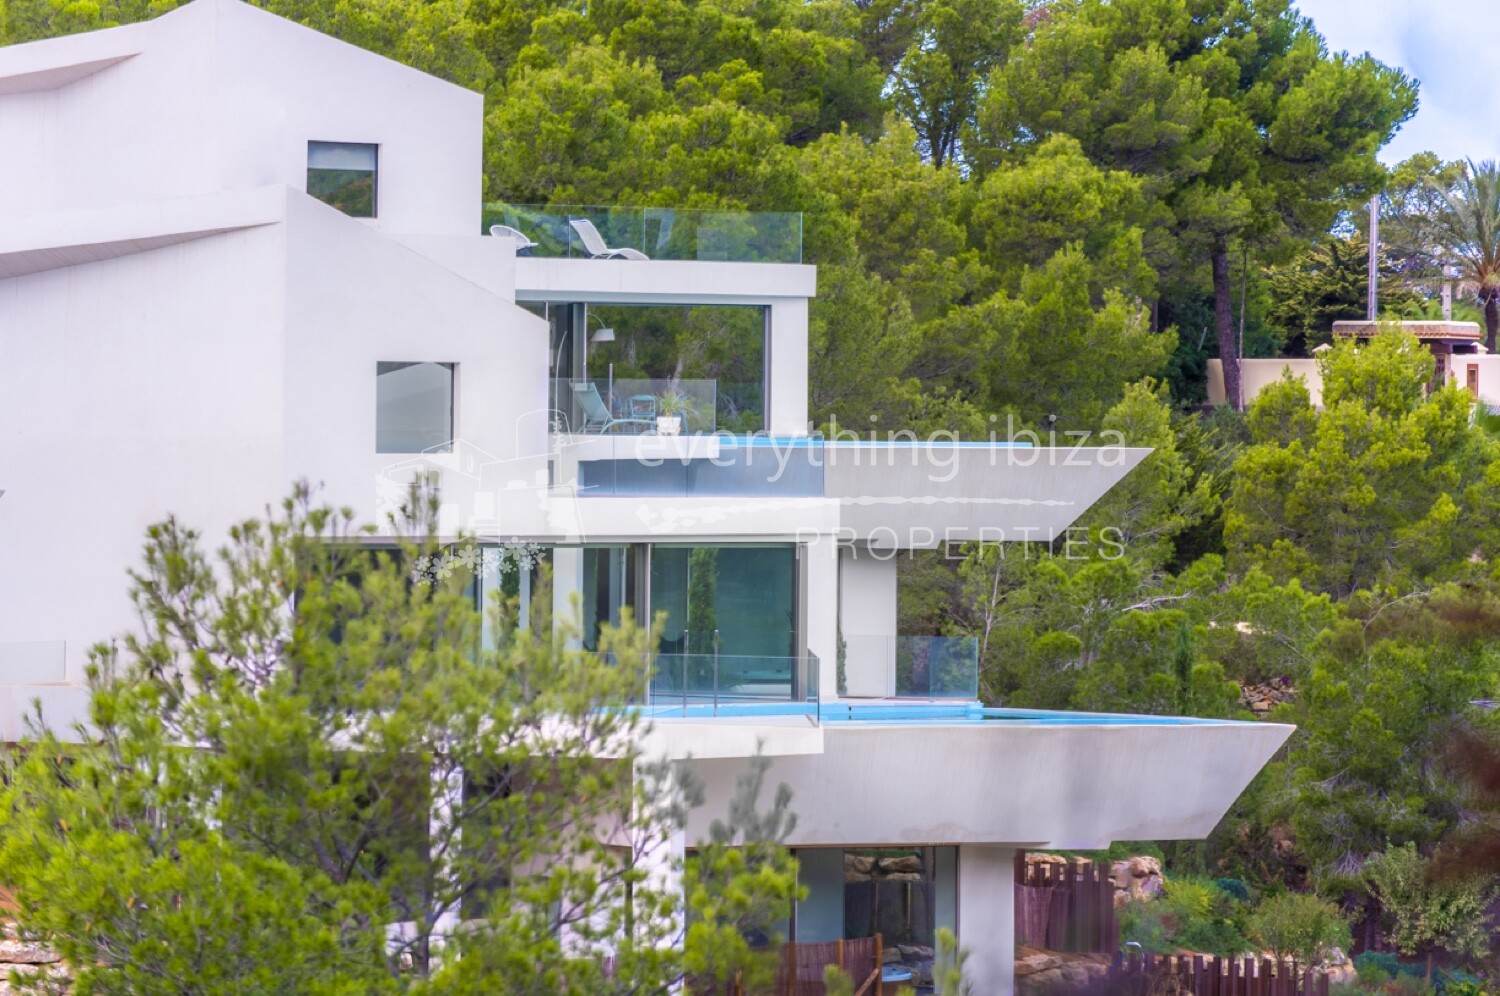 3 Luxury Modern Villas with Magnificent Views in Cala Moli, ref. 1443, for sale in Ibiza by everything ibiza Properties